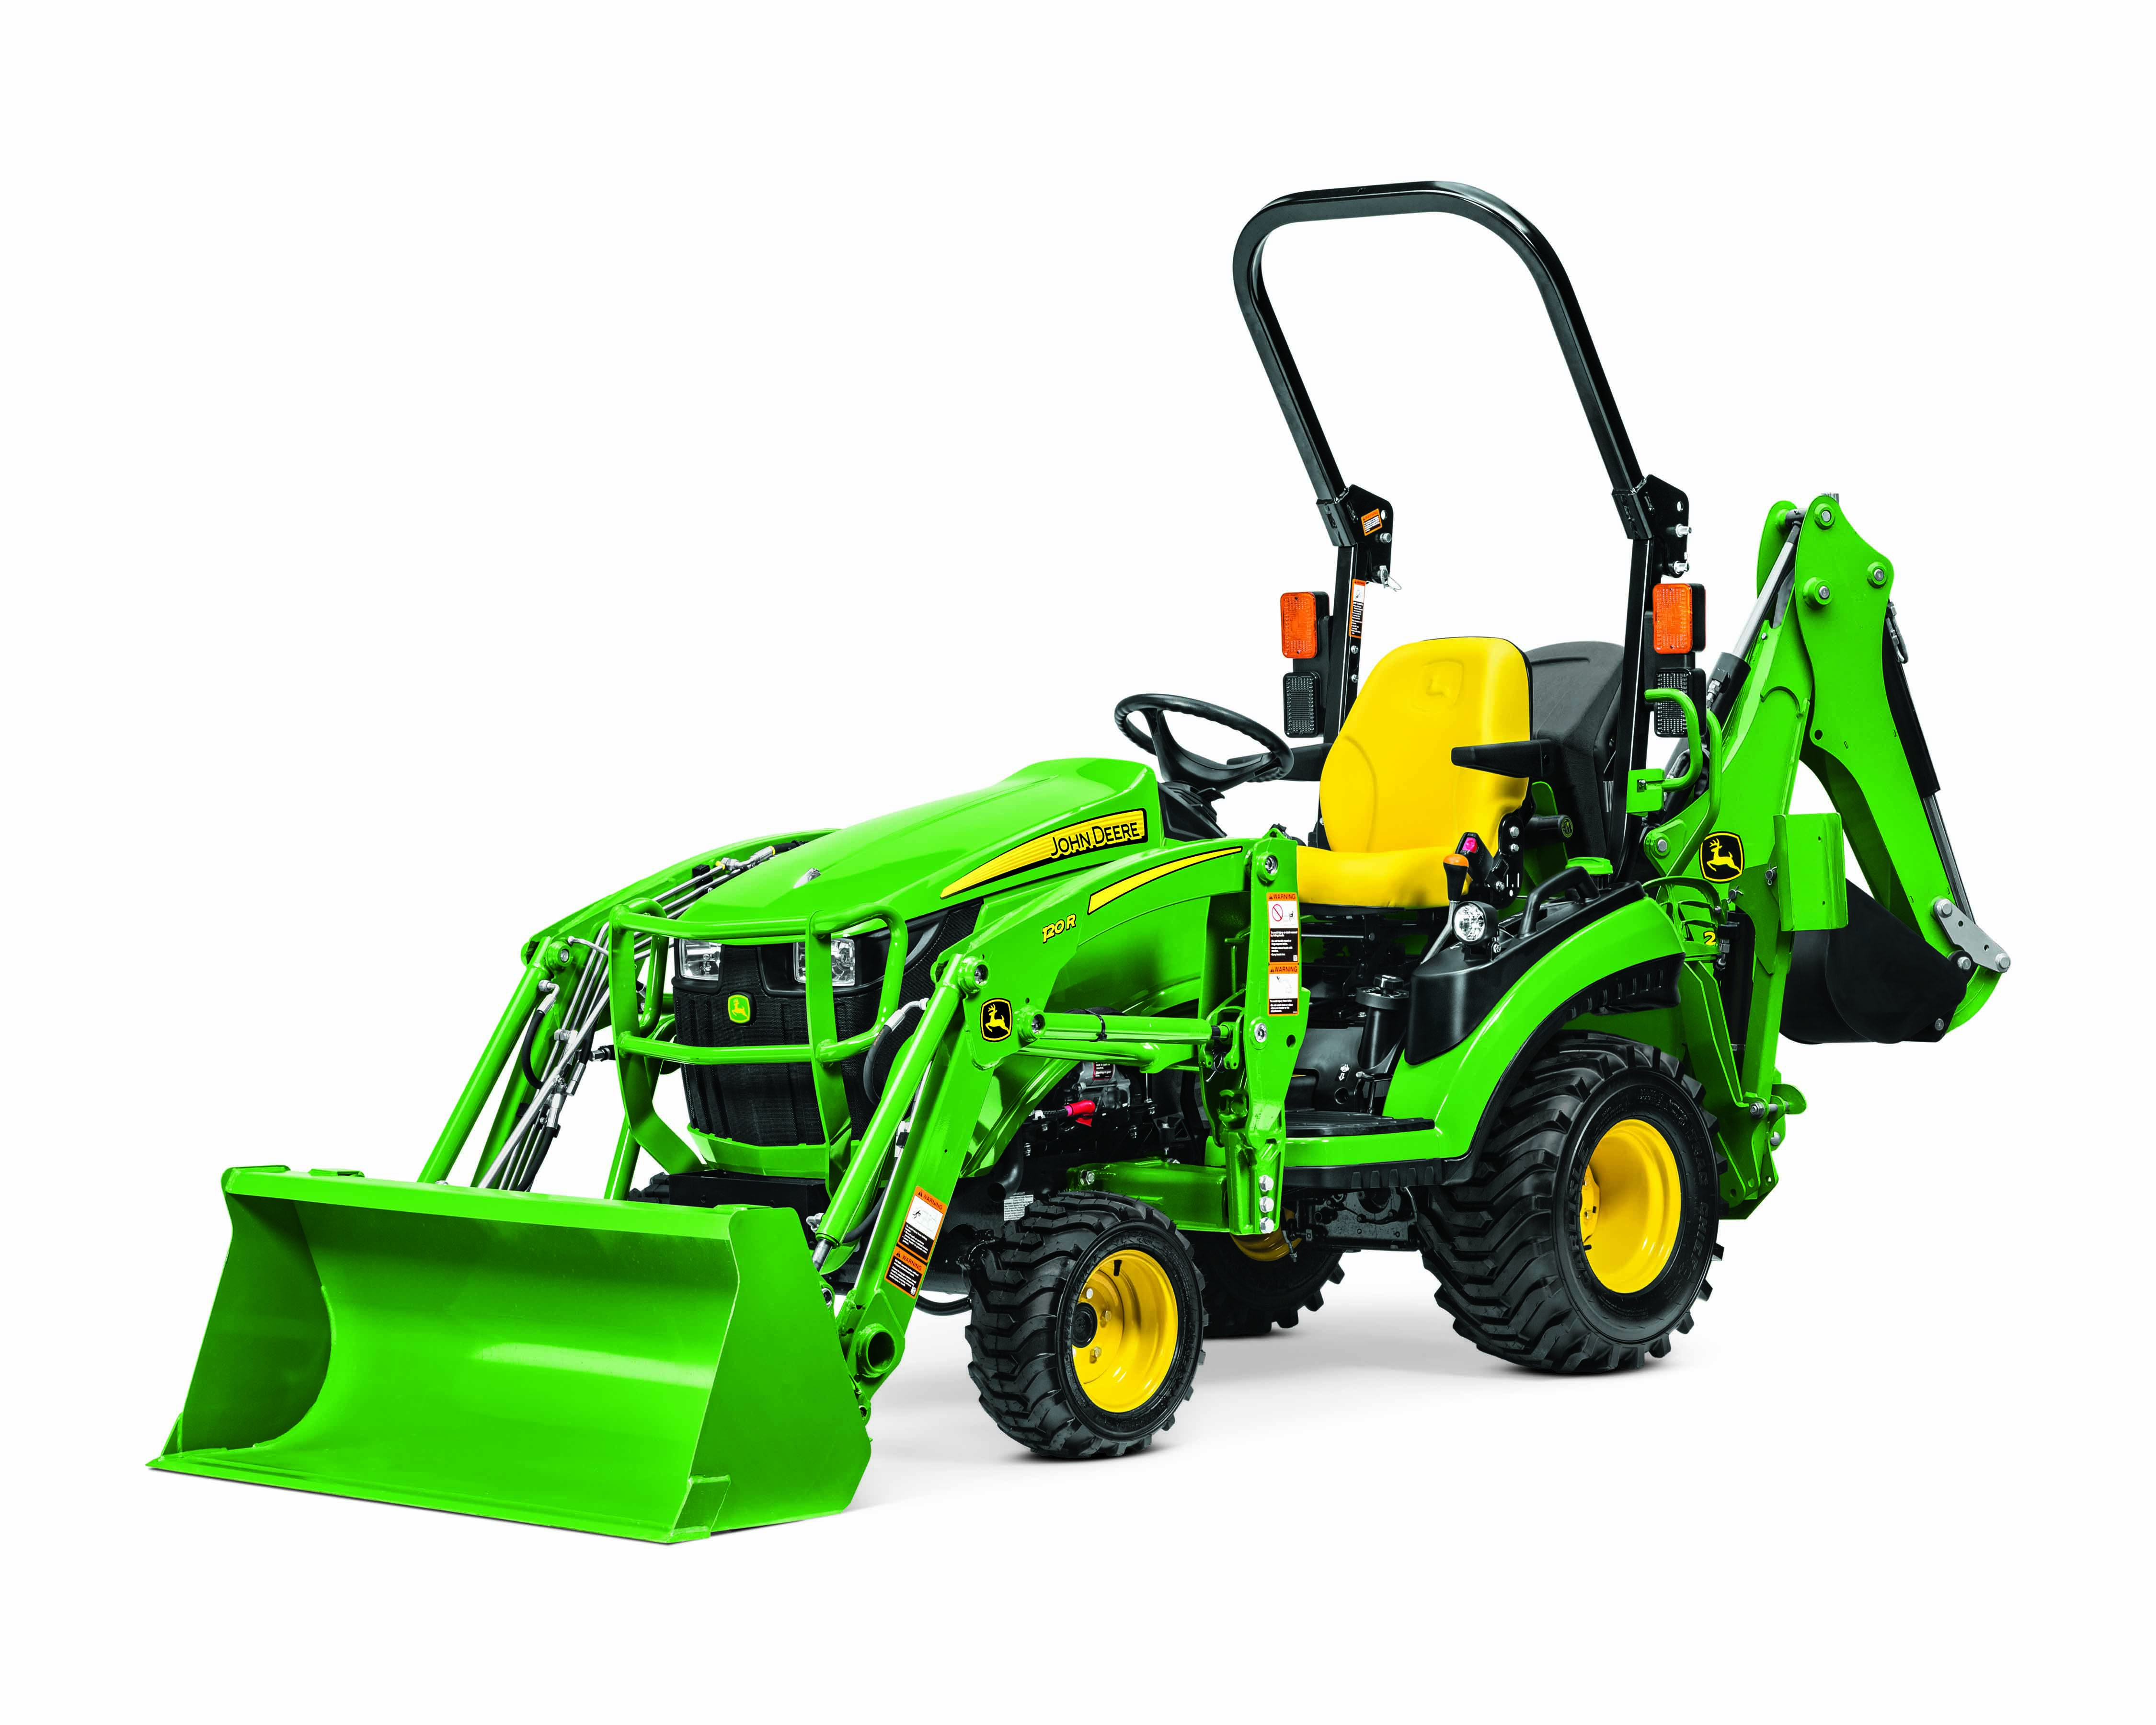  John Deere Compact Tractor Package with loader and backhoe - DIY Digger Package